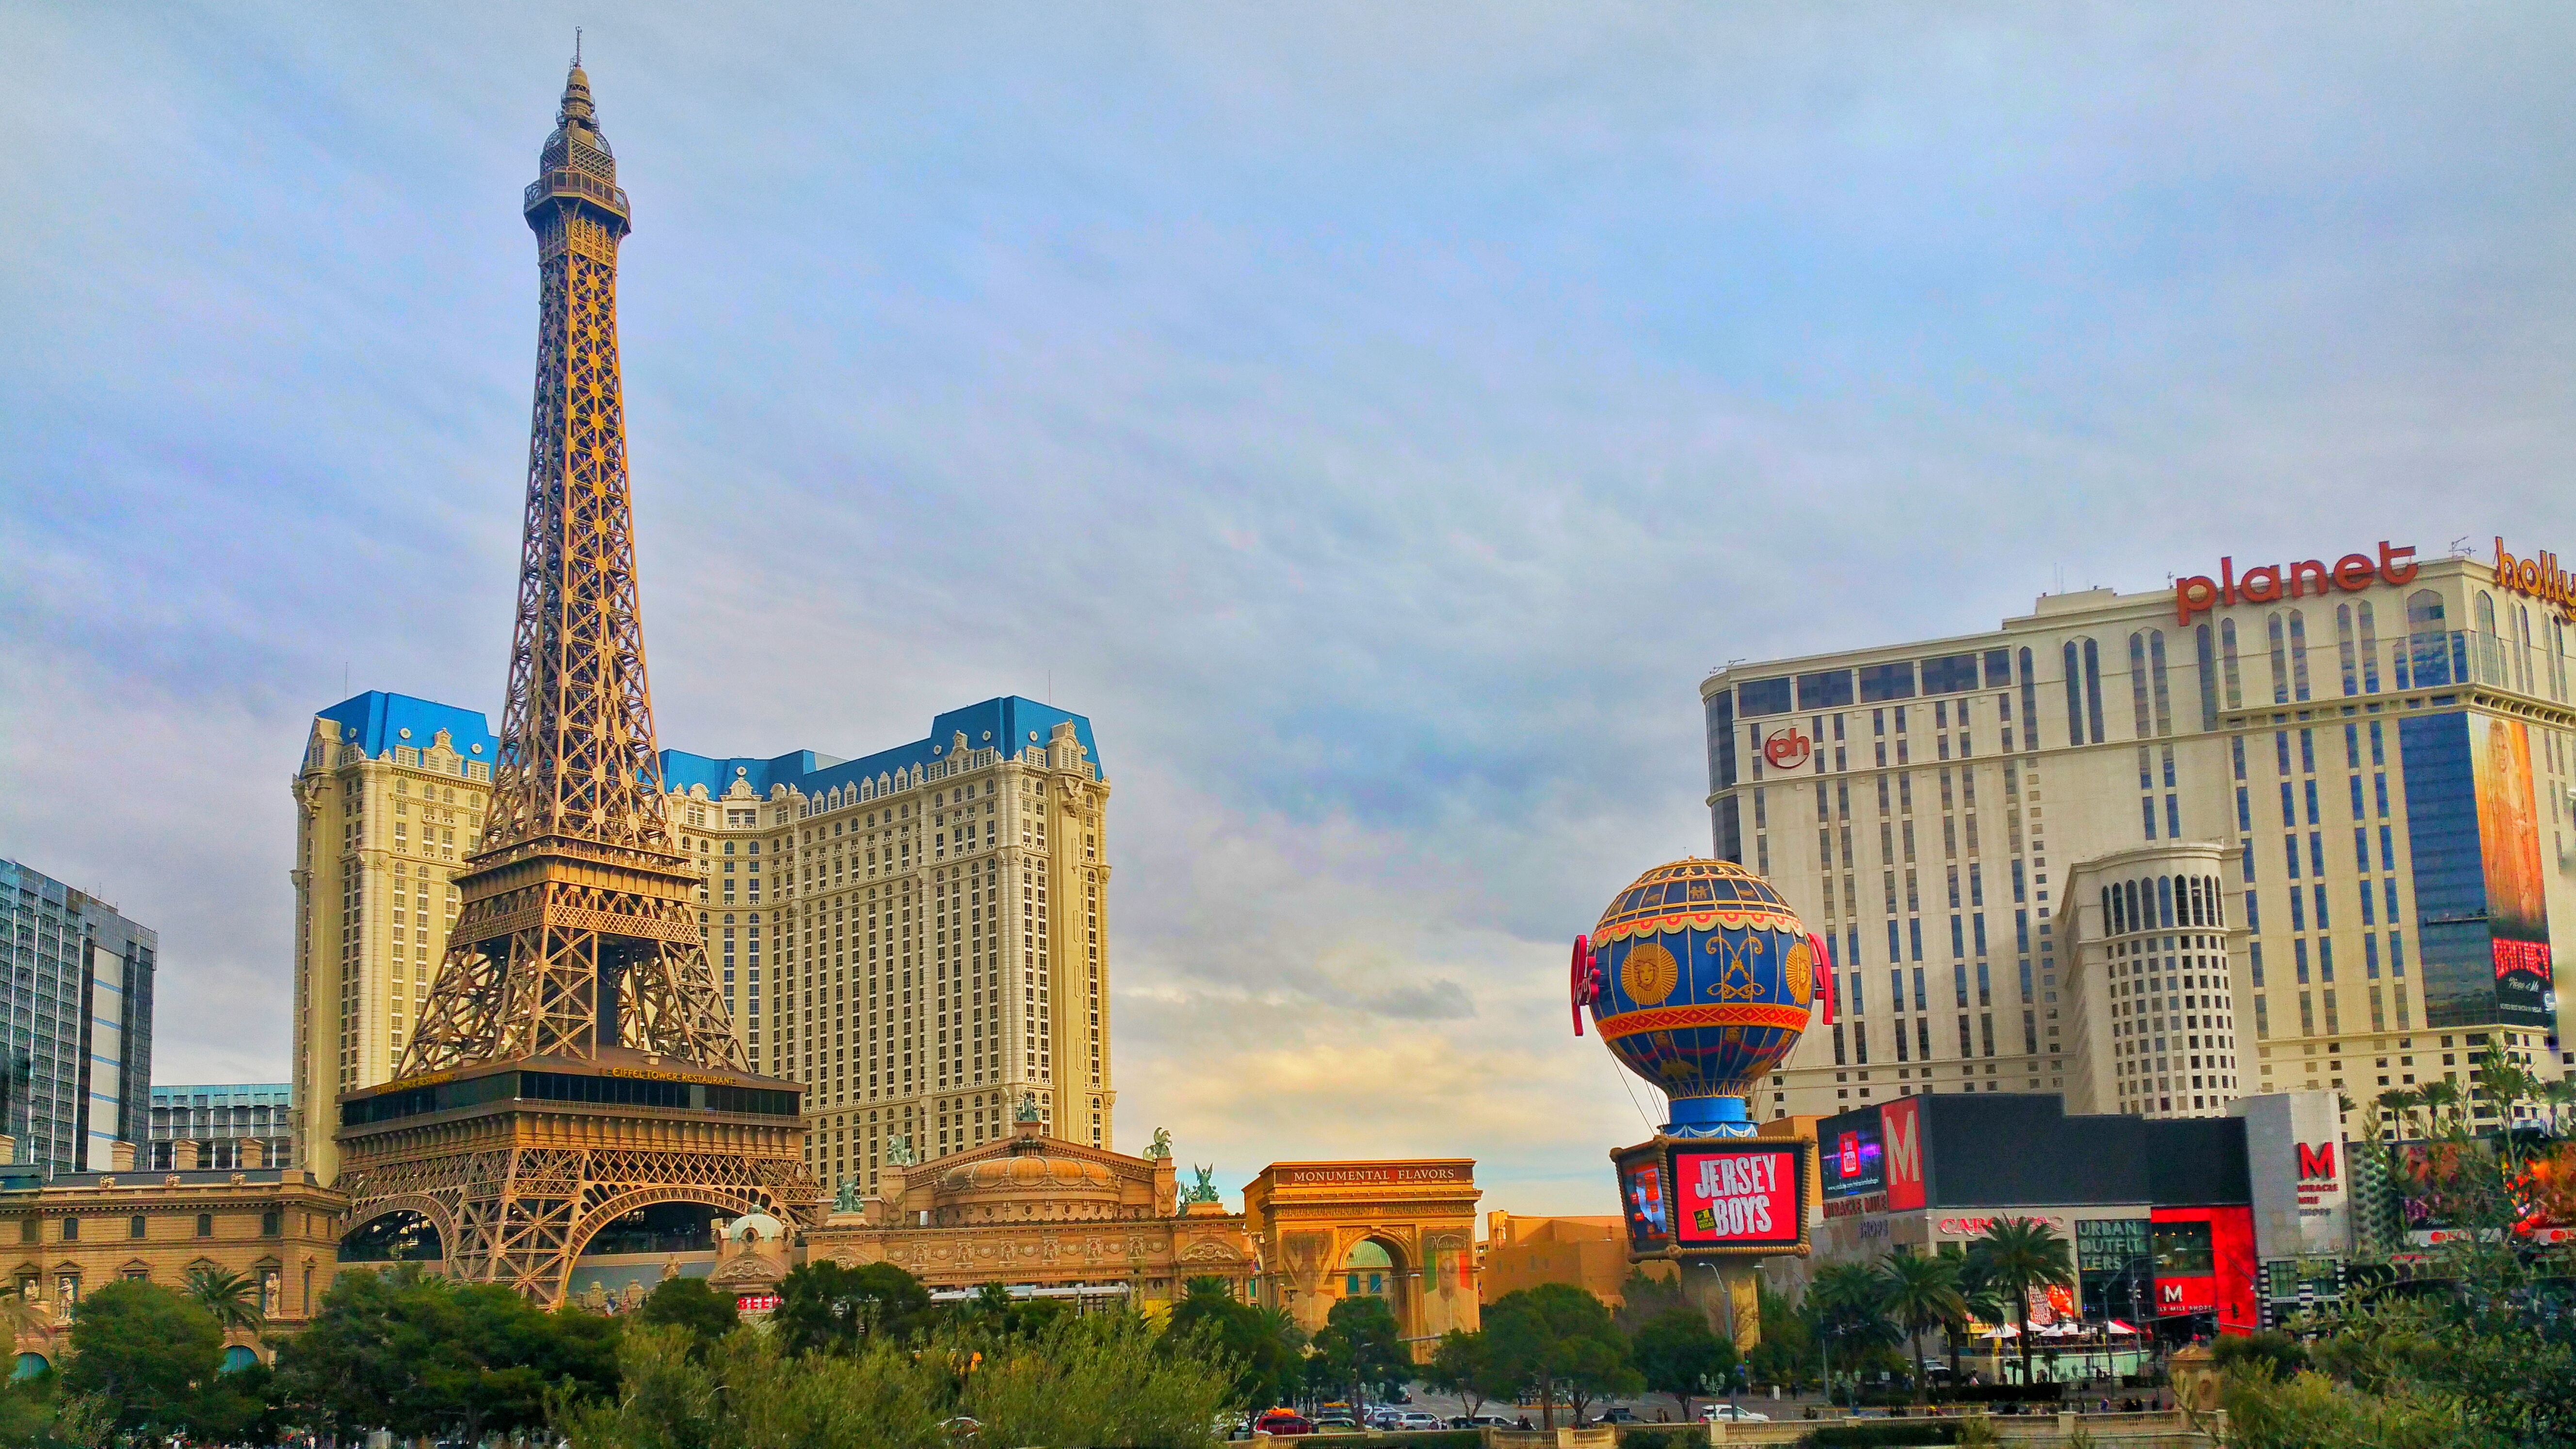 Hotels In Vegas: Should You Stay On The Strip or Not?